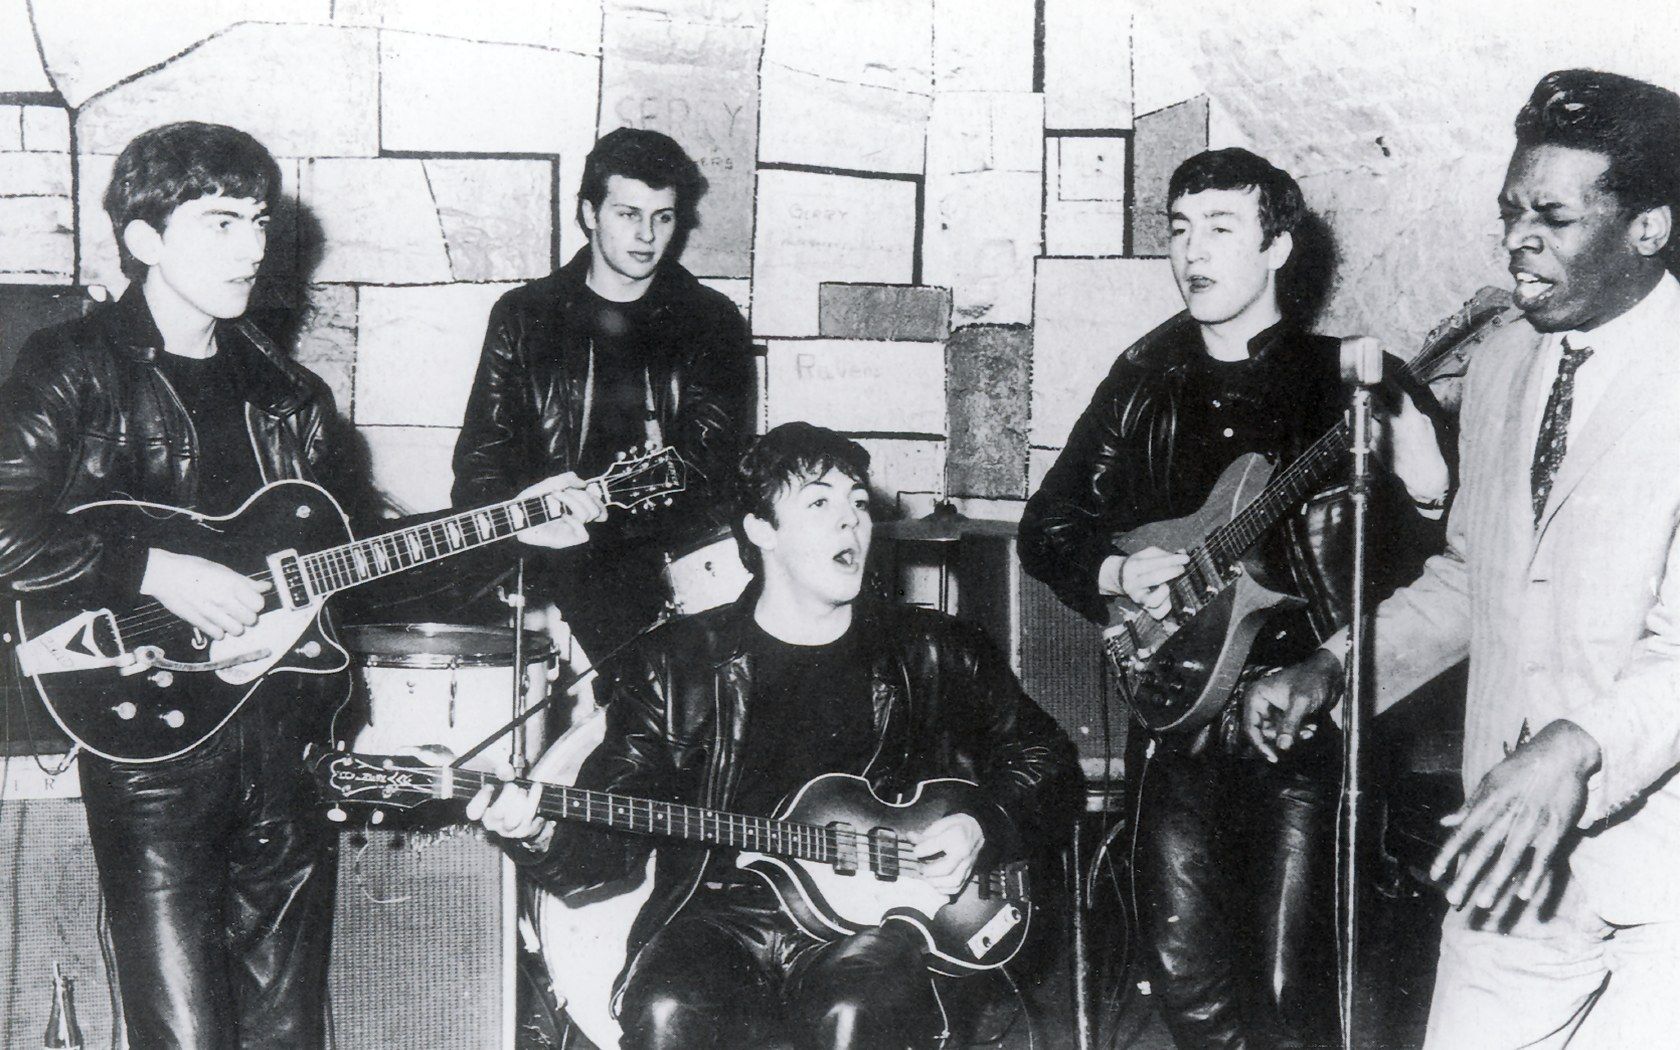 The Beatles Were An English Rock Band Formed In Liverpool